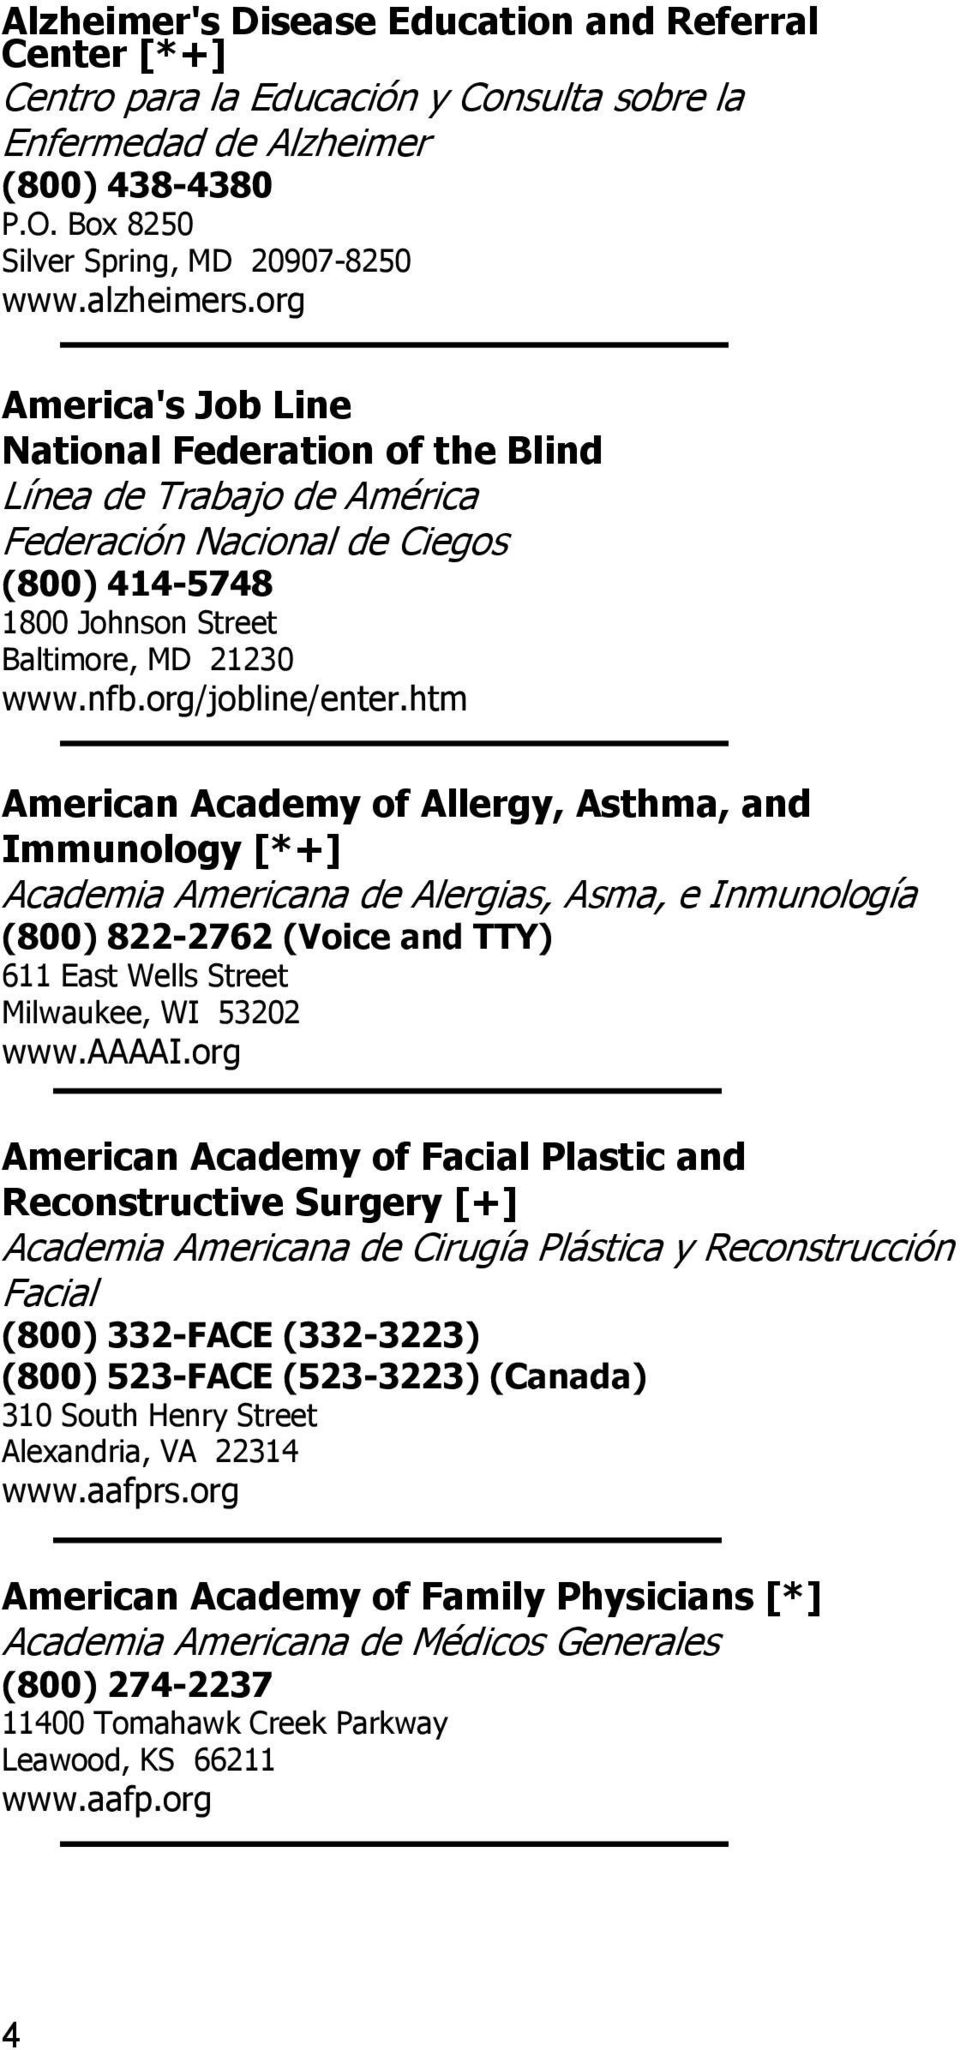 htm American Academy of Allergy, Asthma, and Immunology [*+] Academia Americana de Alergias, Asma, e Inmunología (800) 822-2762 (Voice and TTY) 611 East Wells Street Milwaukee, WI 53202 www.aaaai.